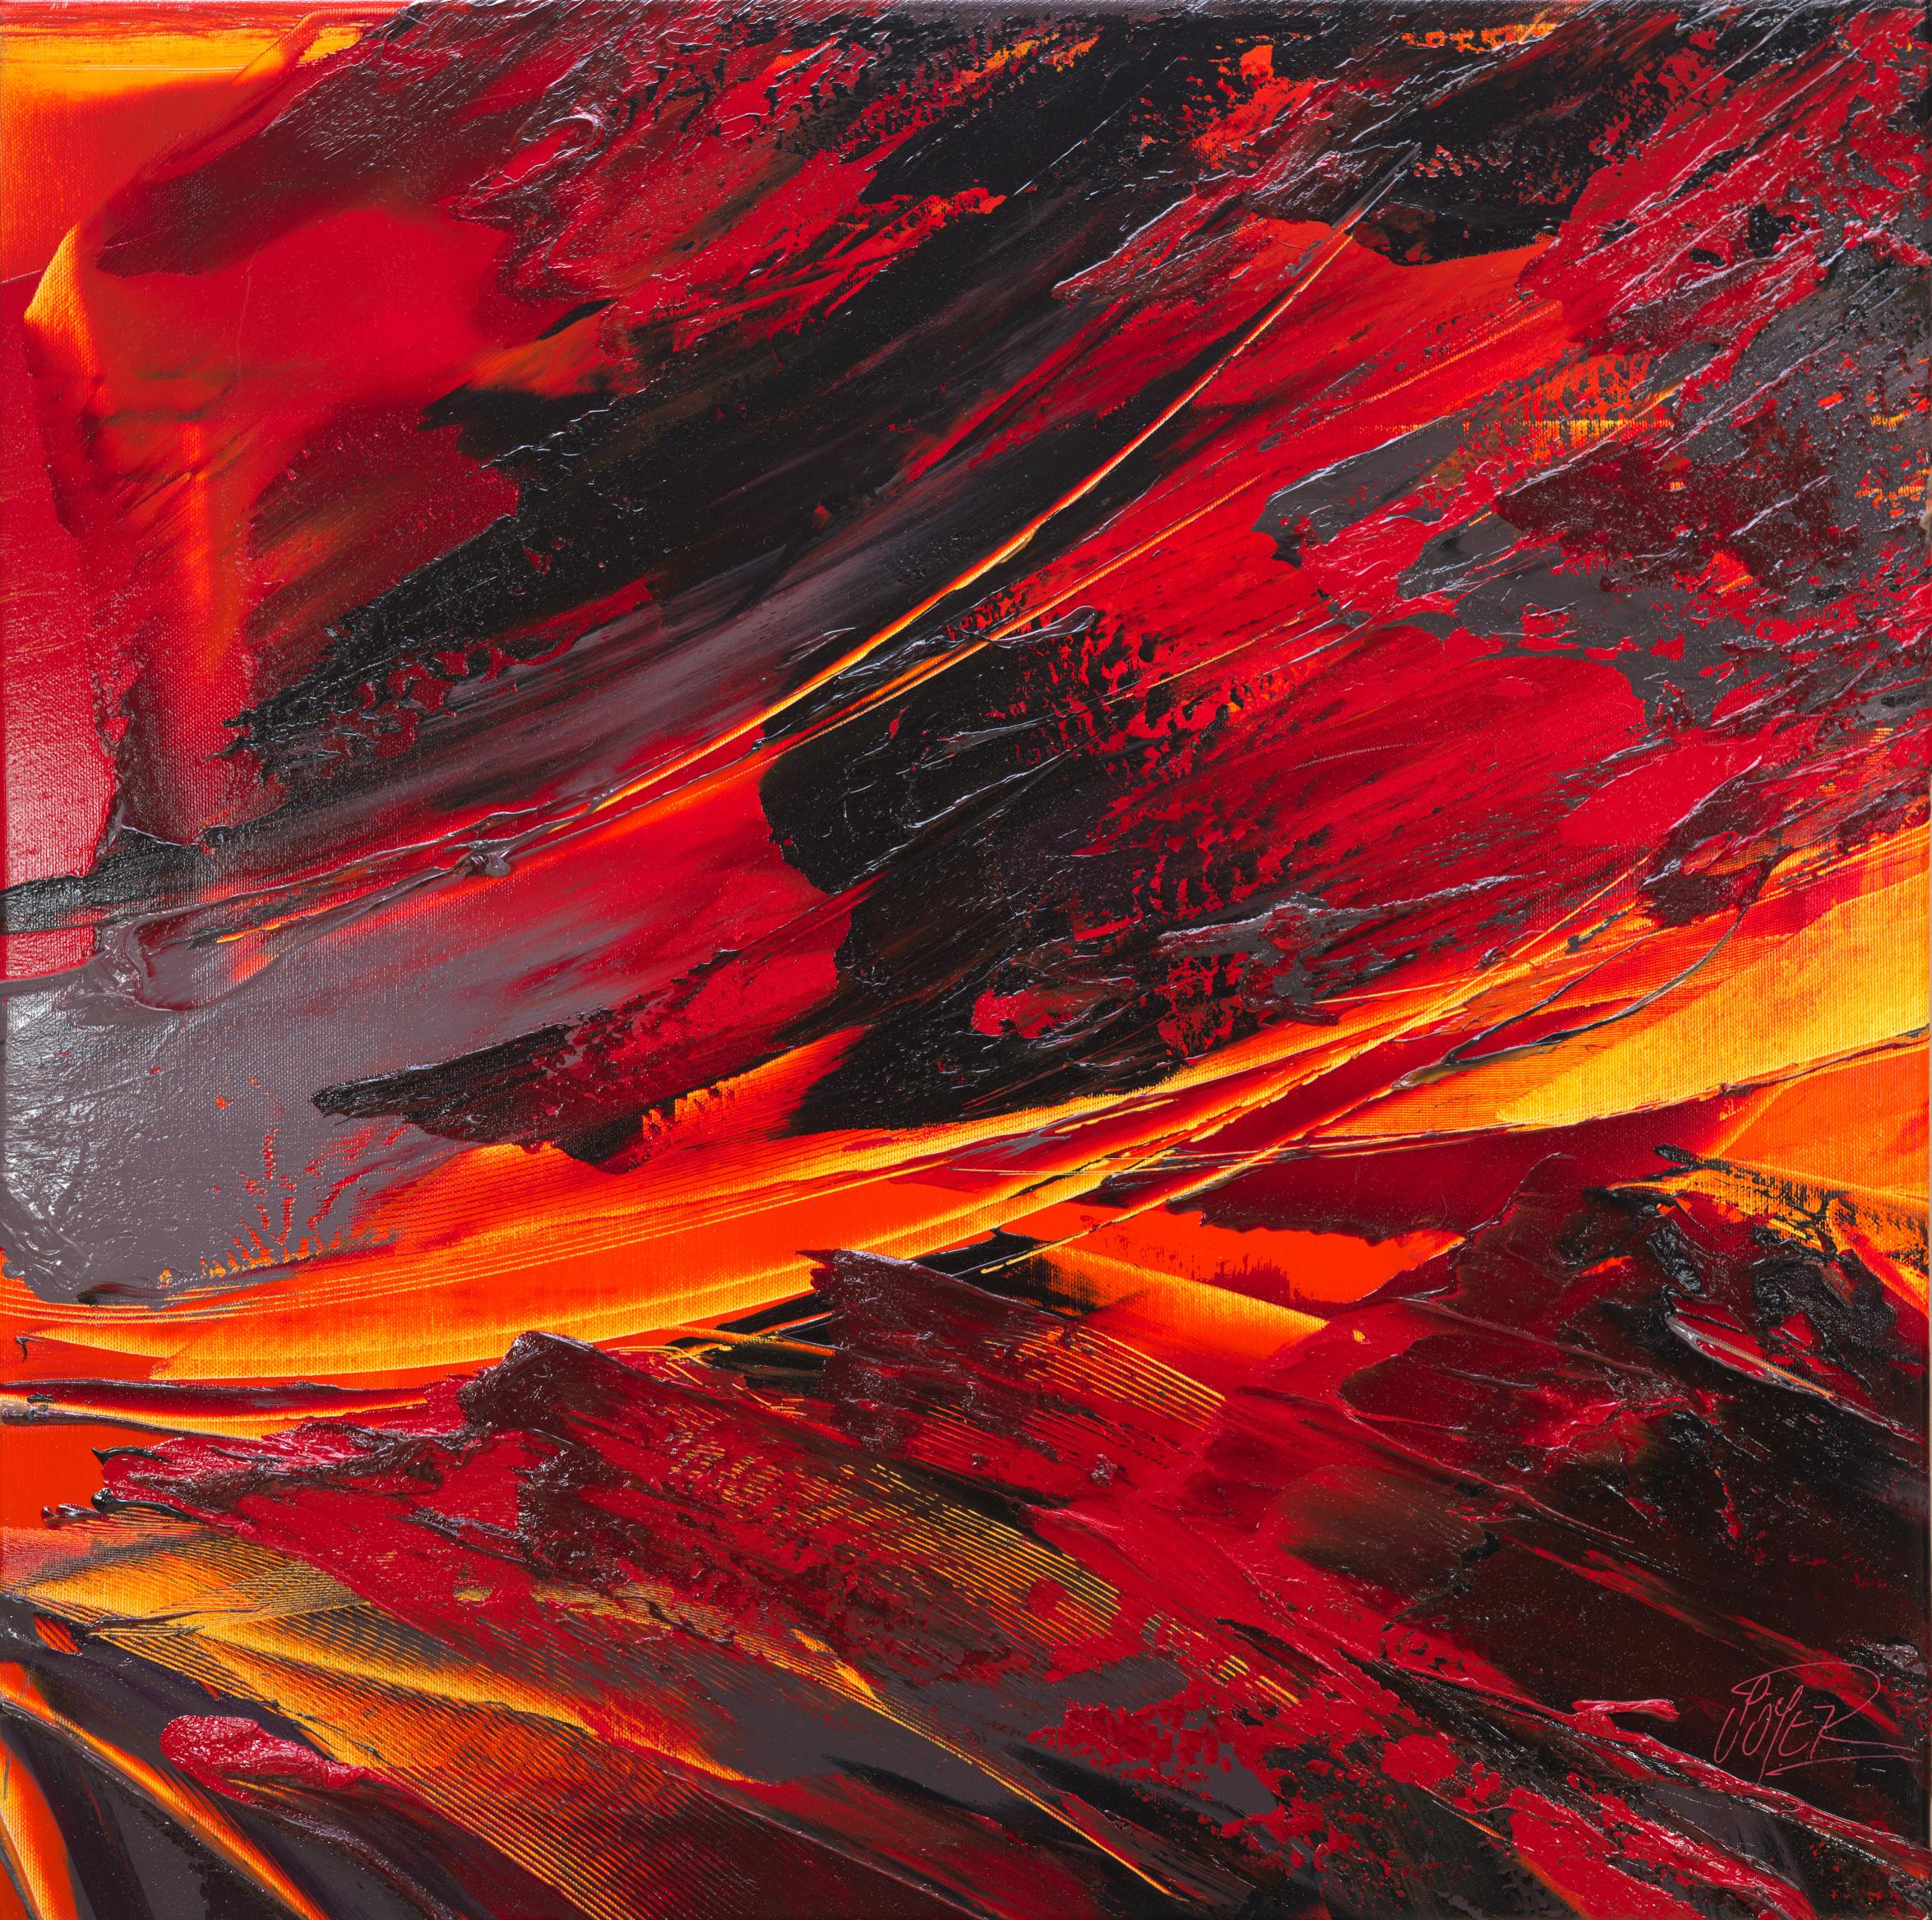 Red Orange Black Volcanic Lava Magma Explosion Abstract Oil Painting, Untitled